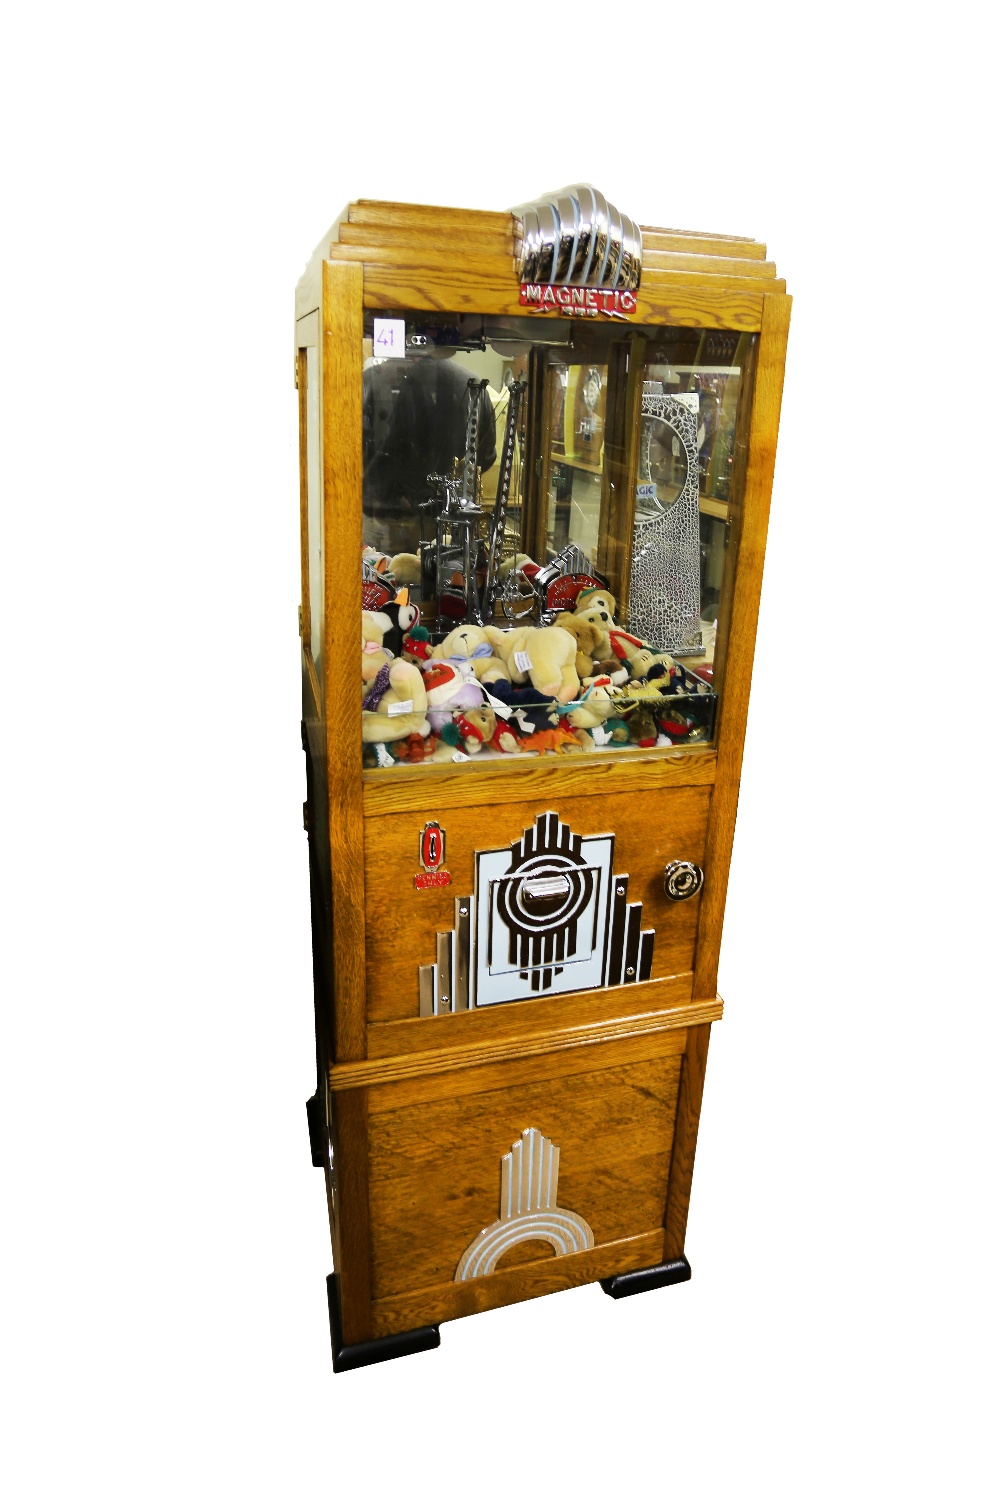 Imperial Crane 1935 Electric Floor Standing Grabber Machine. This example has no marks or names of